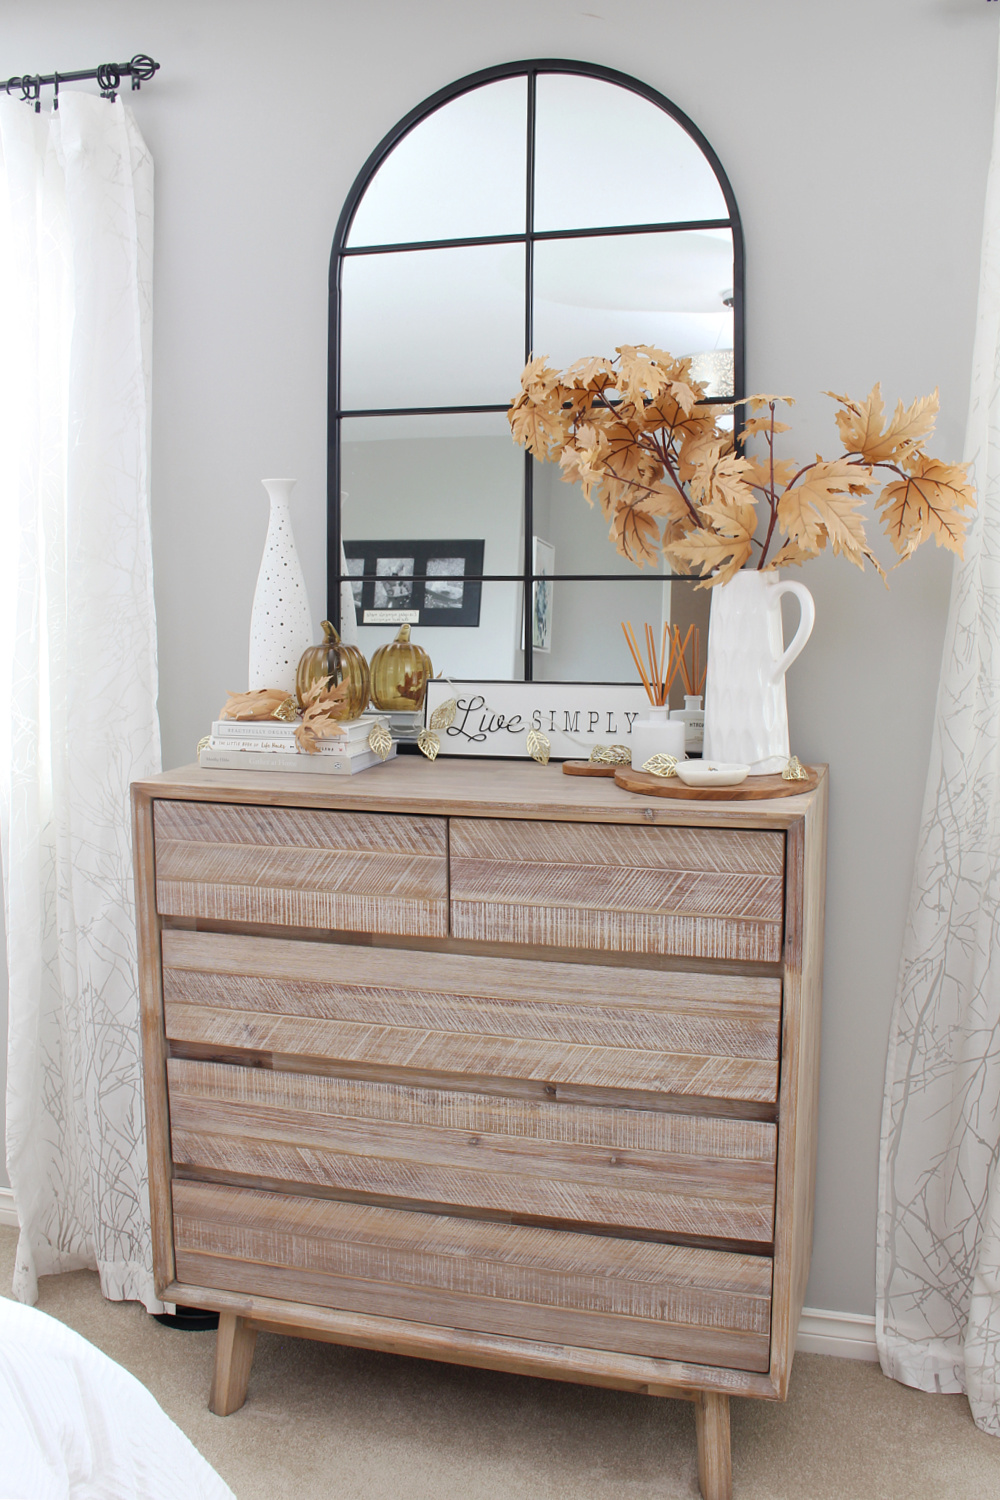 Bedroom dresser with black arched mirror decorated for fall in neutral tones.